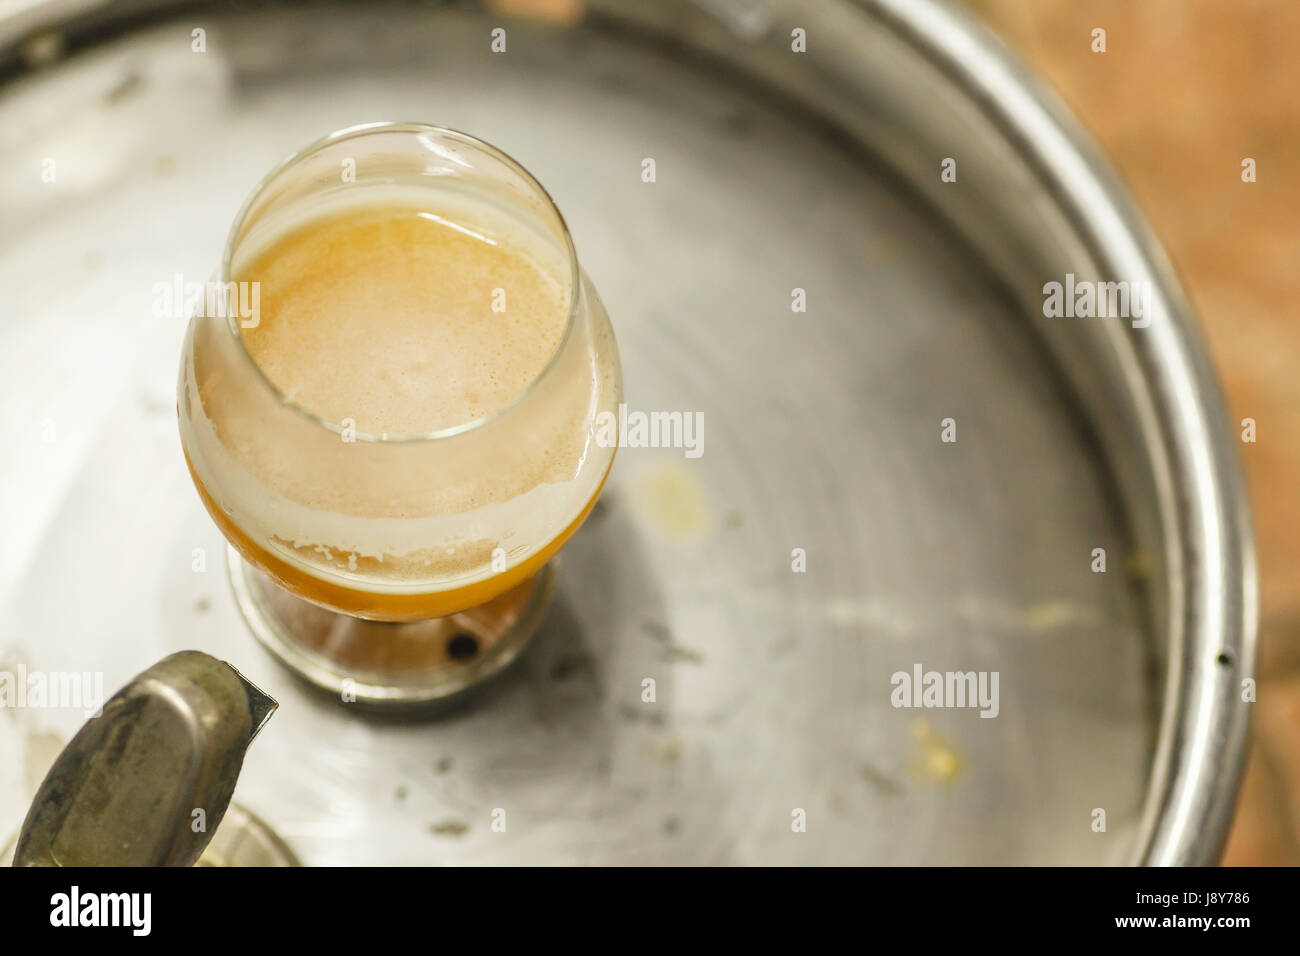 Glass of opaque wheat beer standing on a stainless steel keg at a brewery Stock Photo